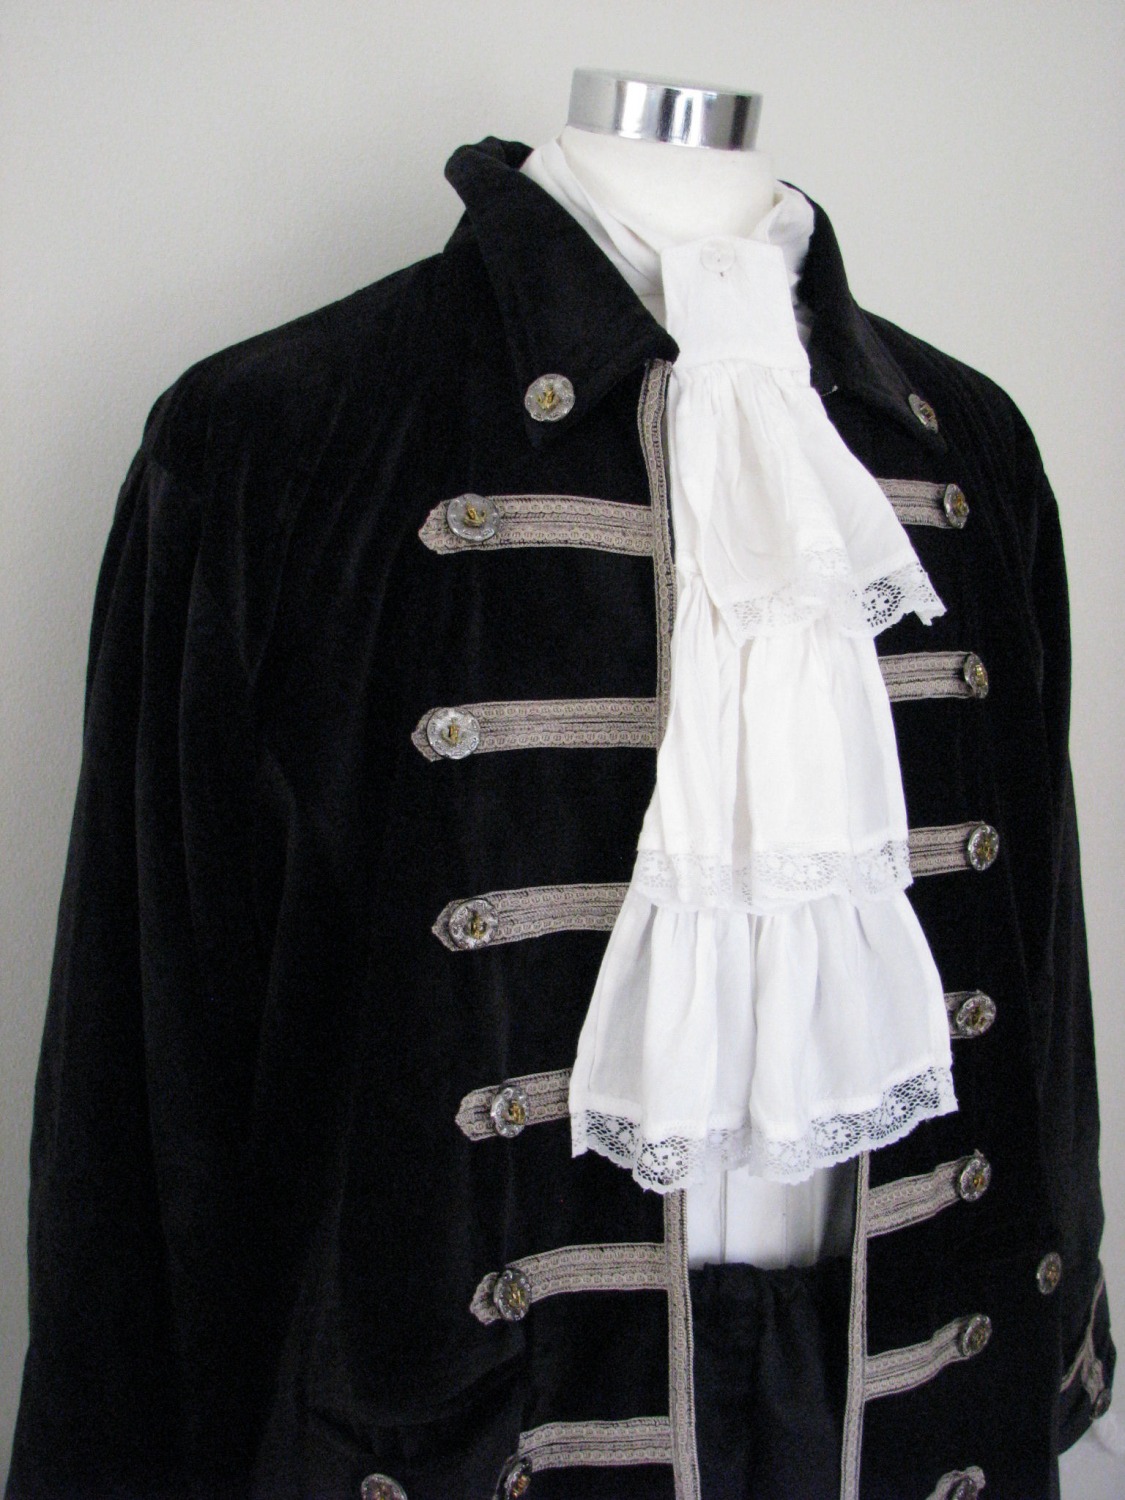 Men's Deluxe 18th Century Masked Ball Costume Image